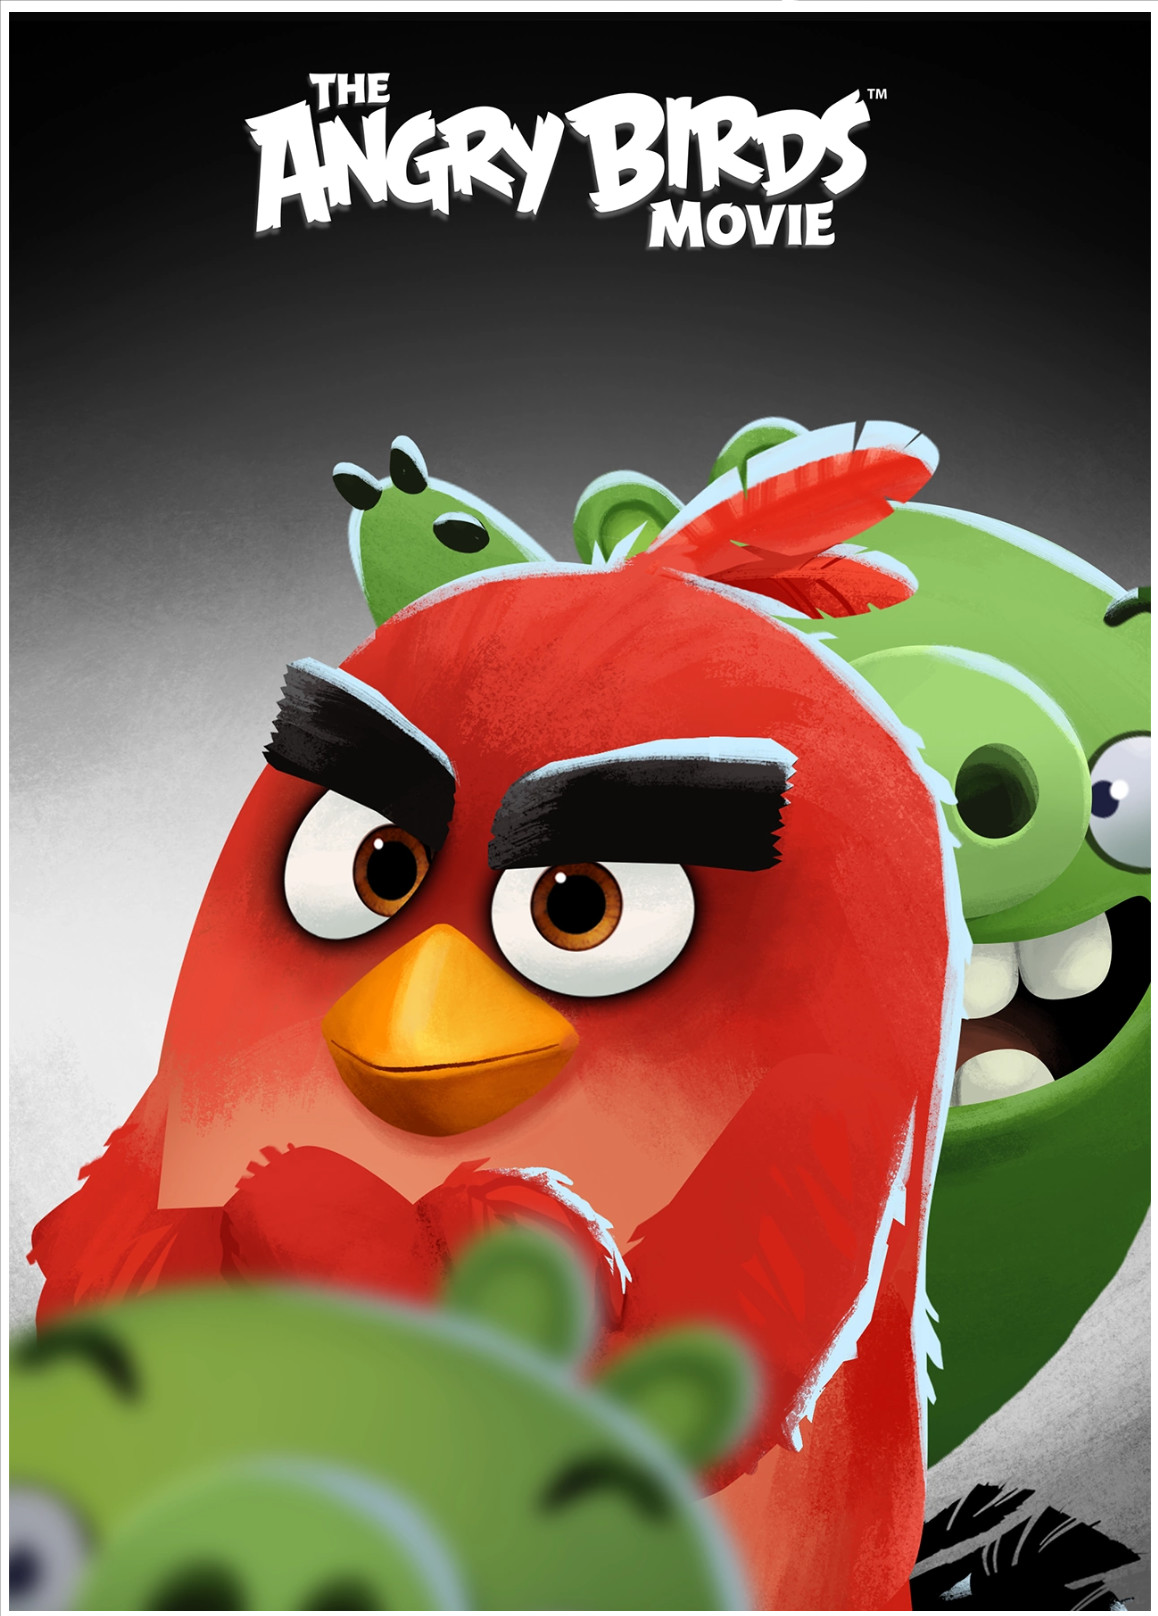 Angry-Birds-Pop-Angry-Birds-Movie-Poster-2 | AngryBirdsNest